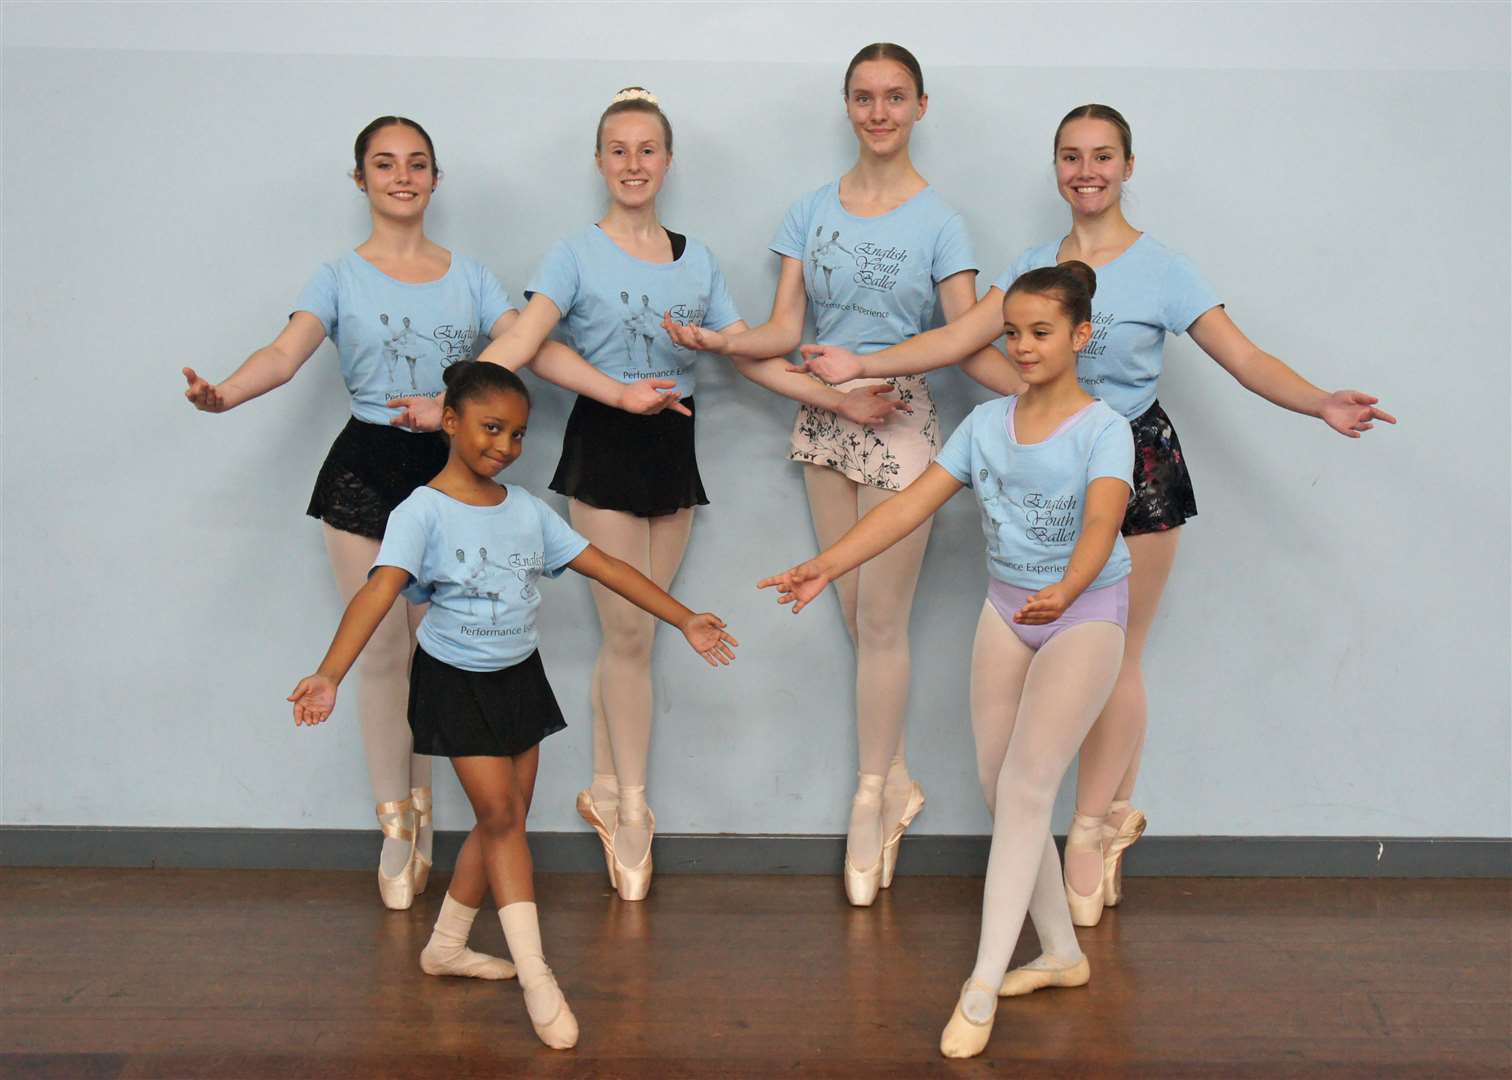 Back line – Samantha Timbers, Elle Phillips, Emily Bradley, Jasmine Phillips, and front line – Inaya Fraser and Taliah are all performing with the English Youth Ballet